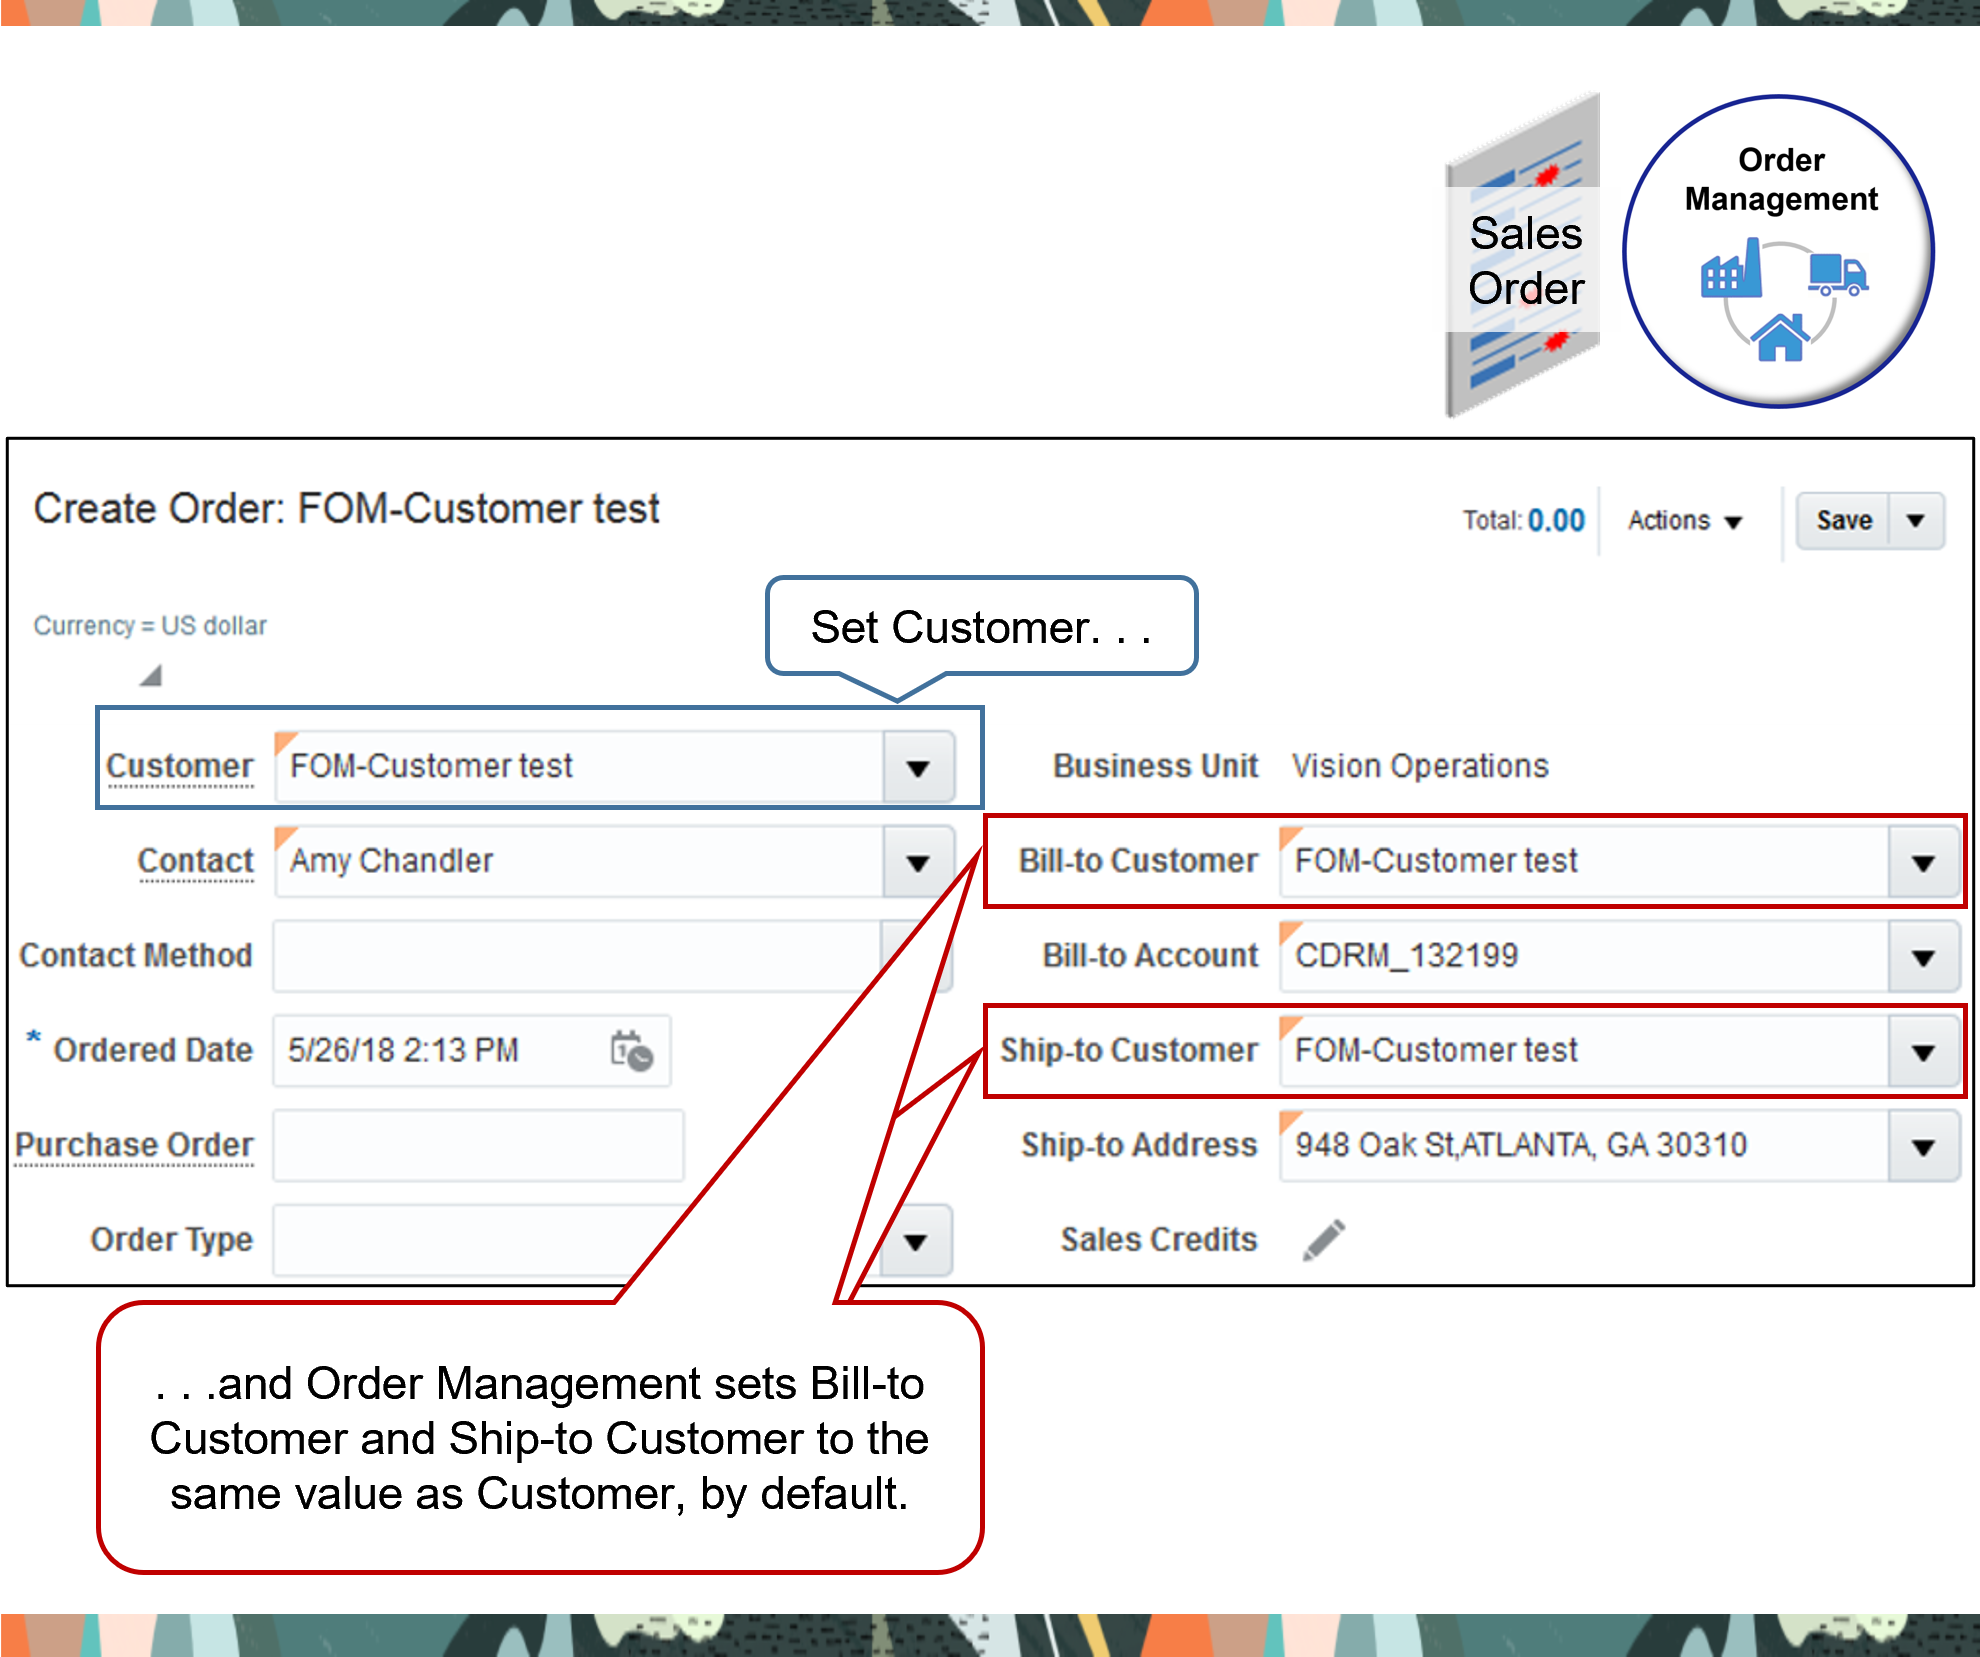 Bill-to Customer and Ship-to Customer on Create Order page.